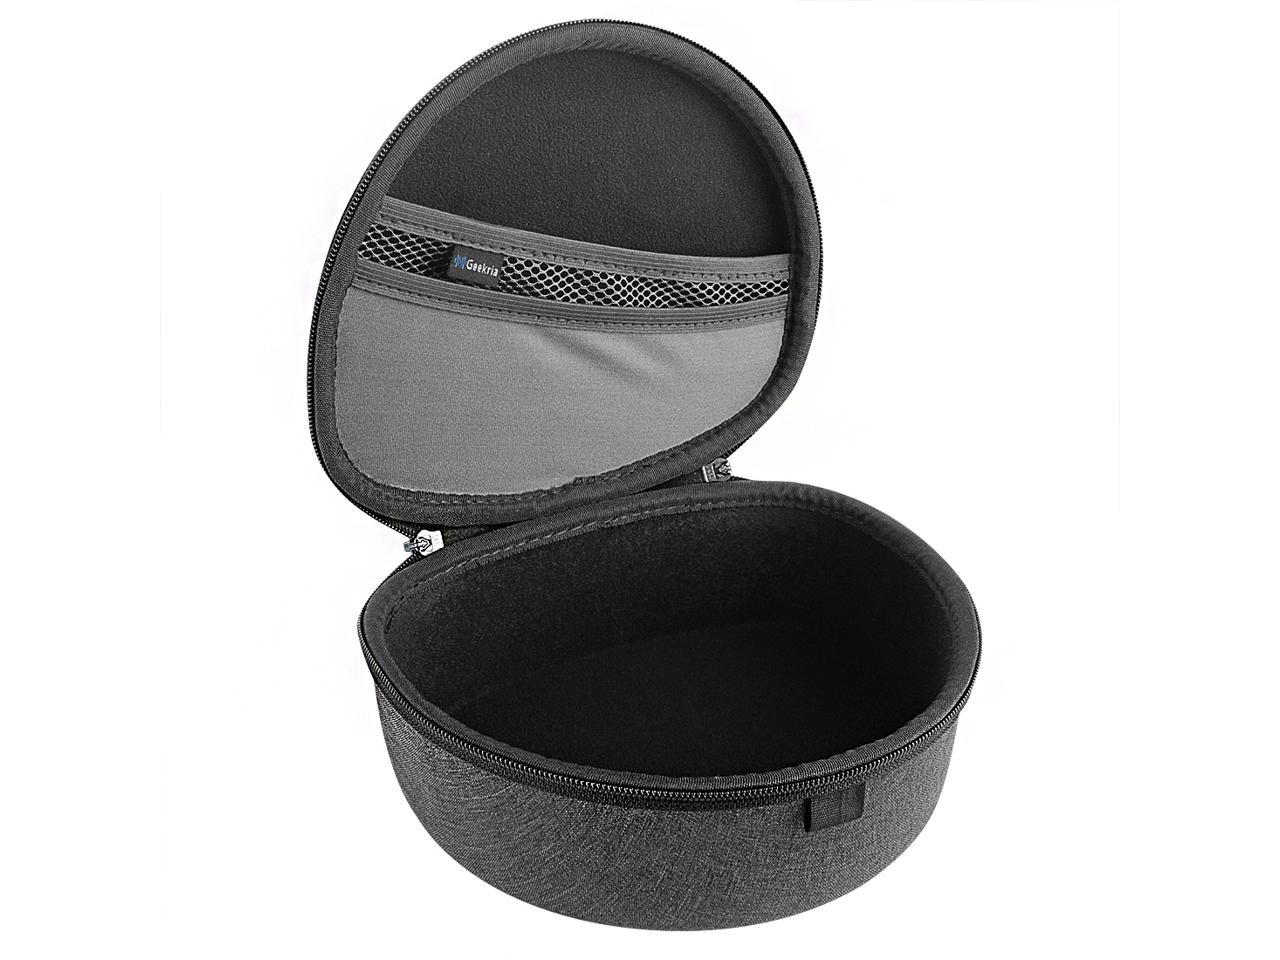 Geekria Shield Headphones Case Compatible with Skullcandy Crusher ANC ...